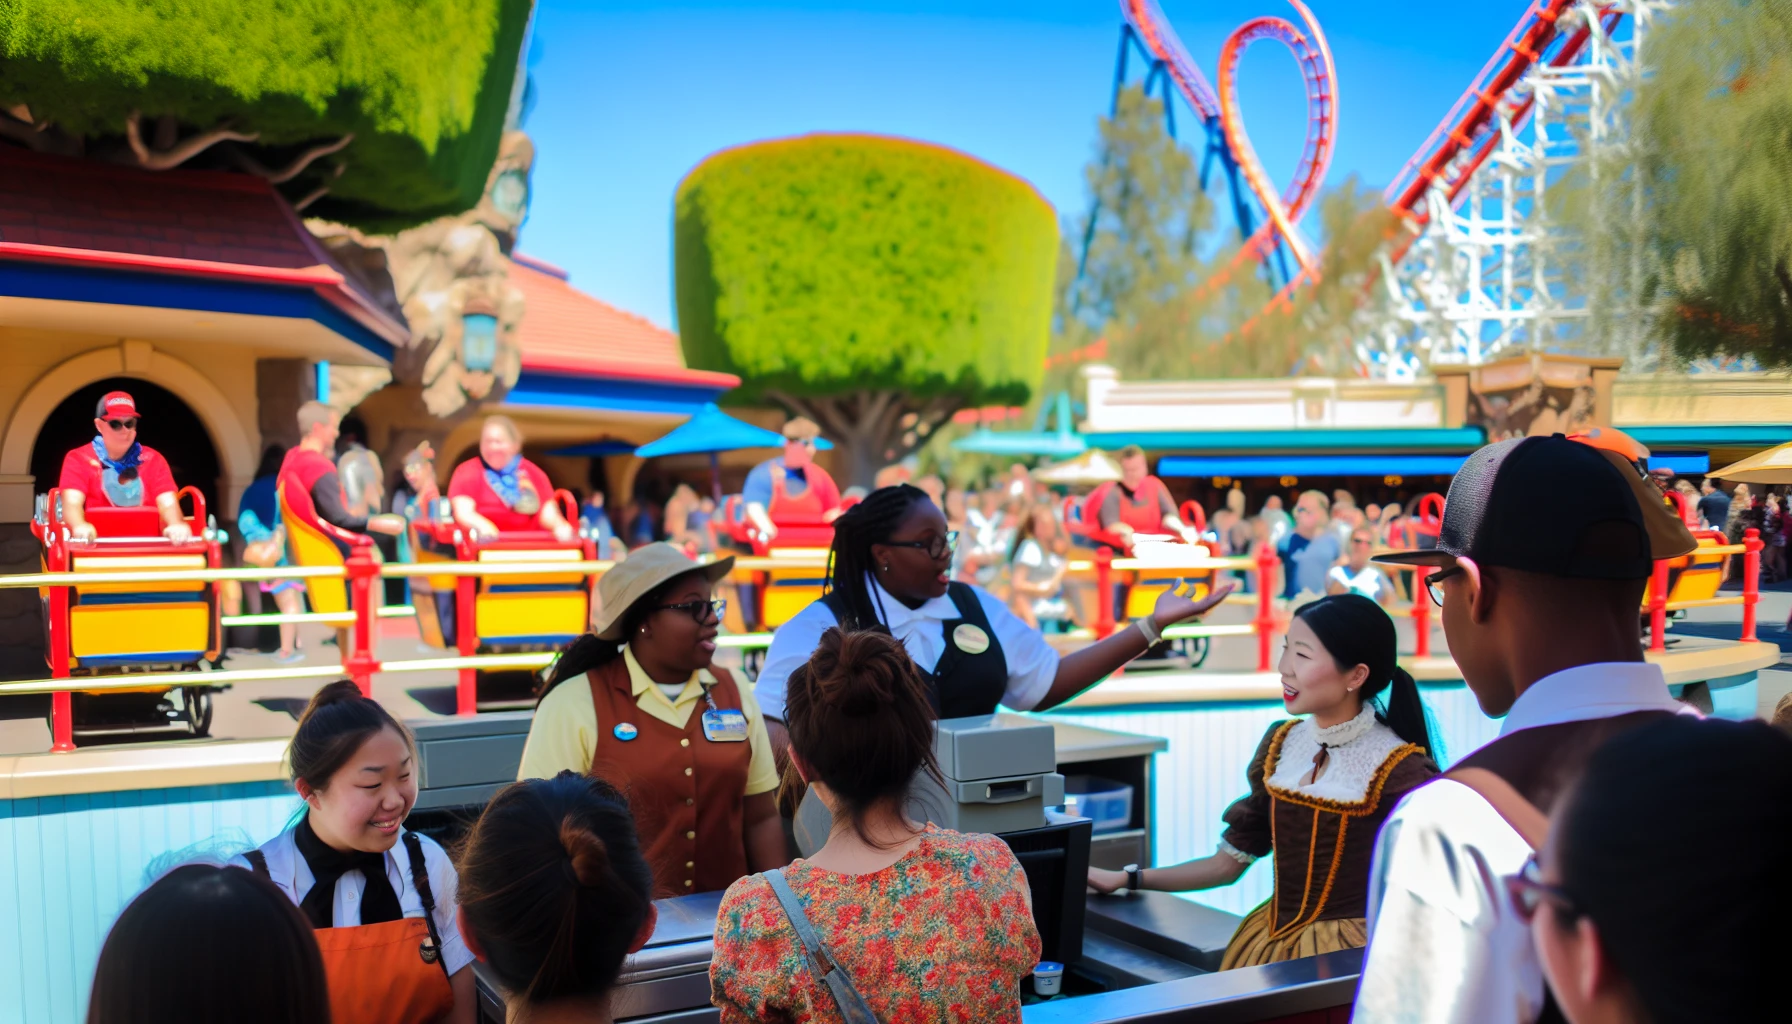 Employees at Knott's Berry Farm in Buena Park CA